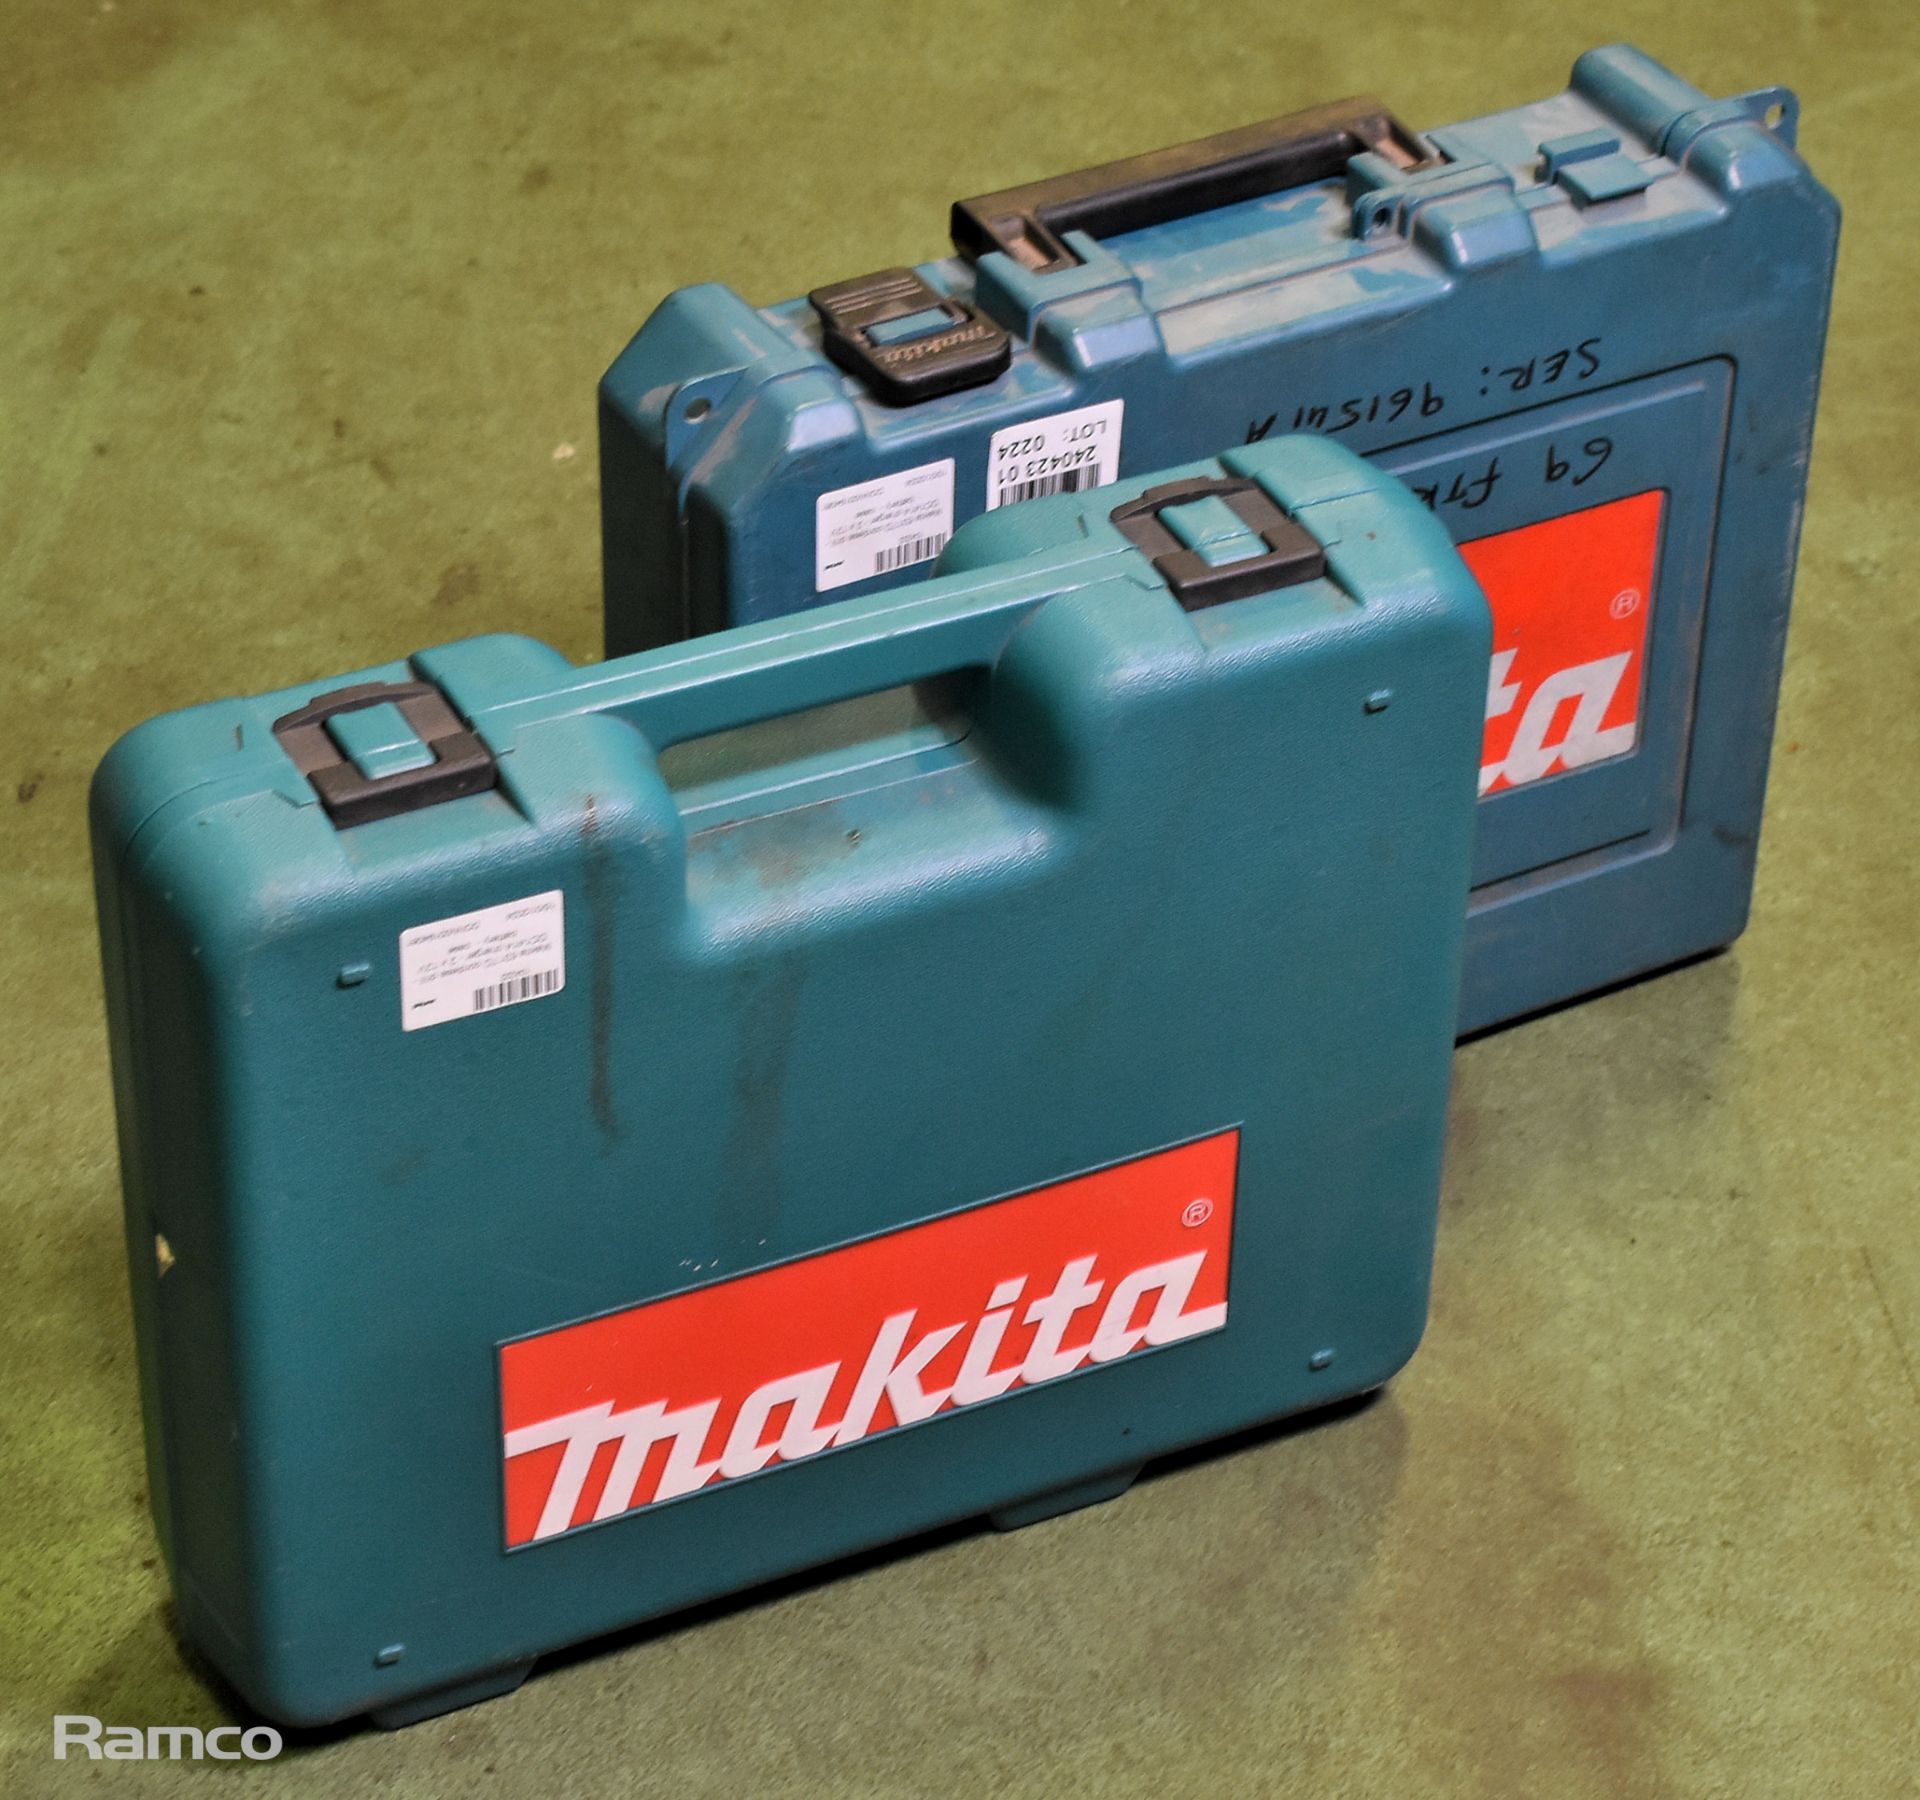 2x Makita 6317D cordless drill - DC1414 charger - 2x 12V batteries - case - Image 8 of 8